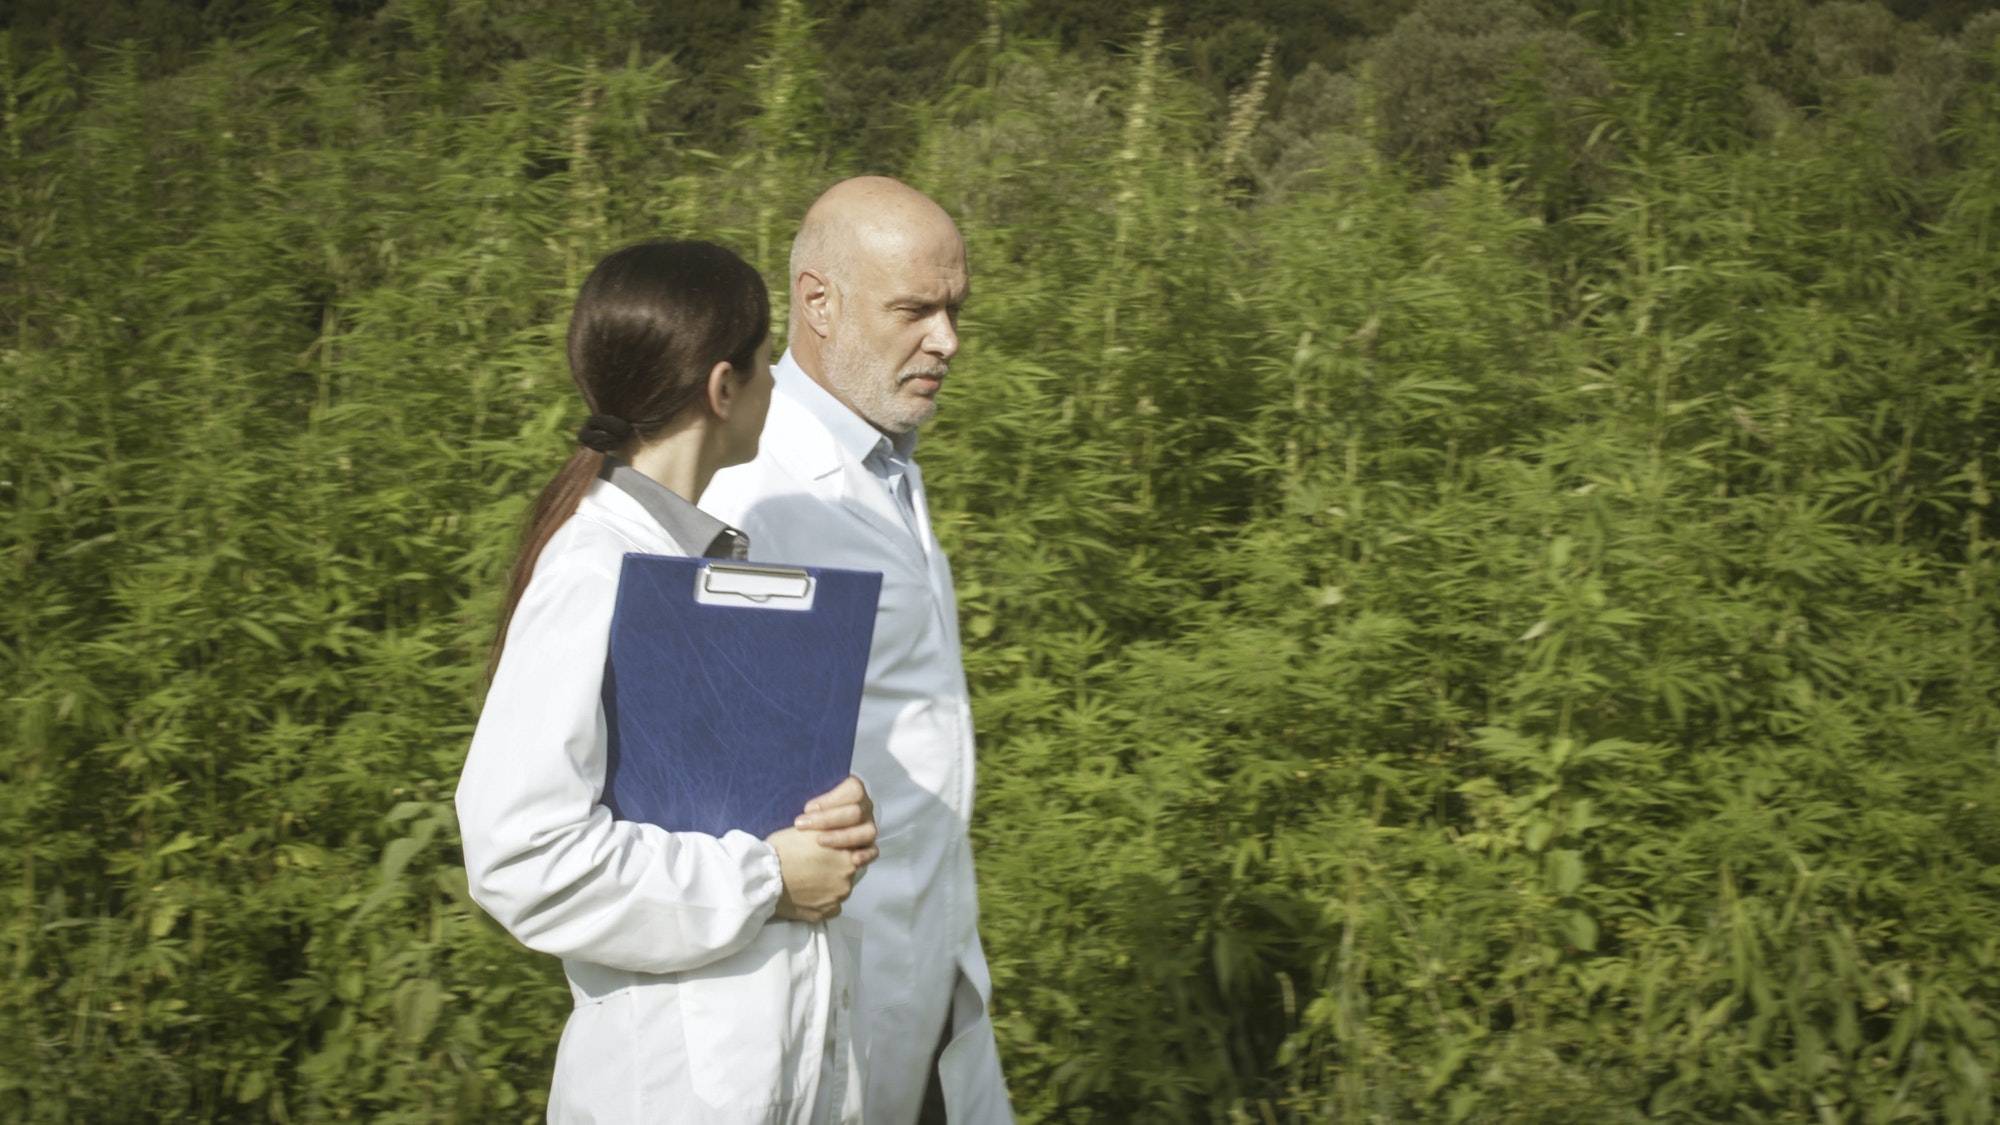 Scientists walking in a hemp field and discussing